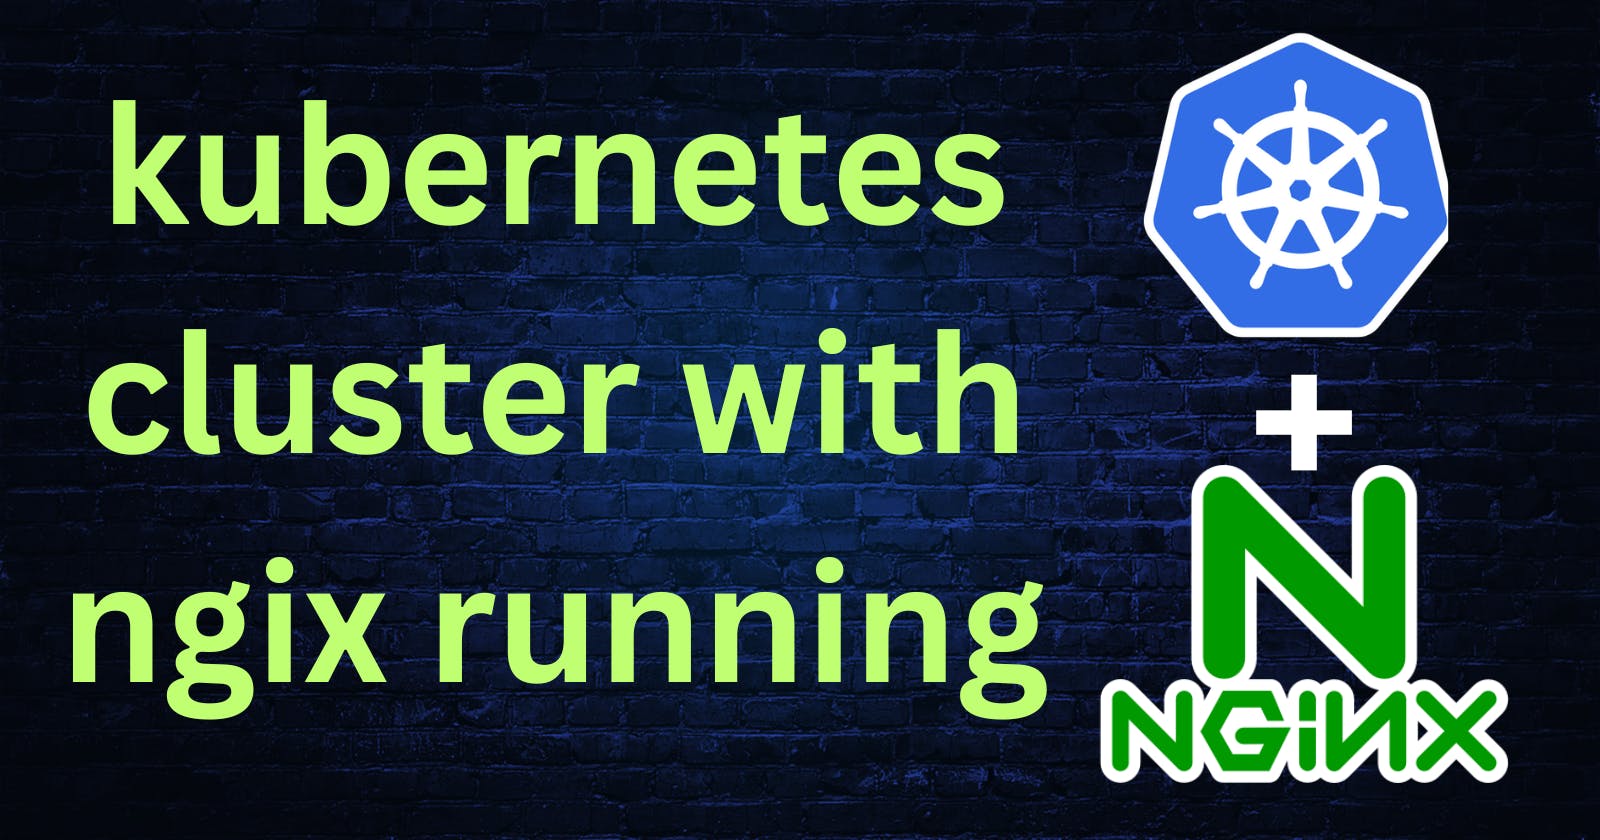 Launching your First Kubernetes Cluster with Nginx running